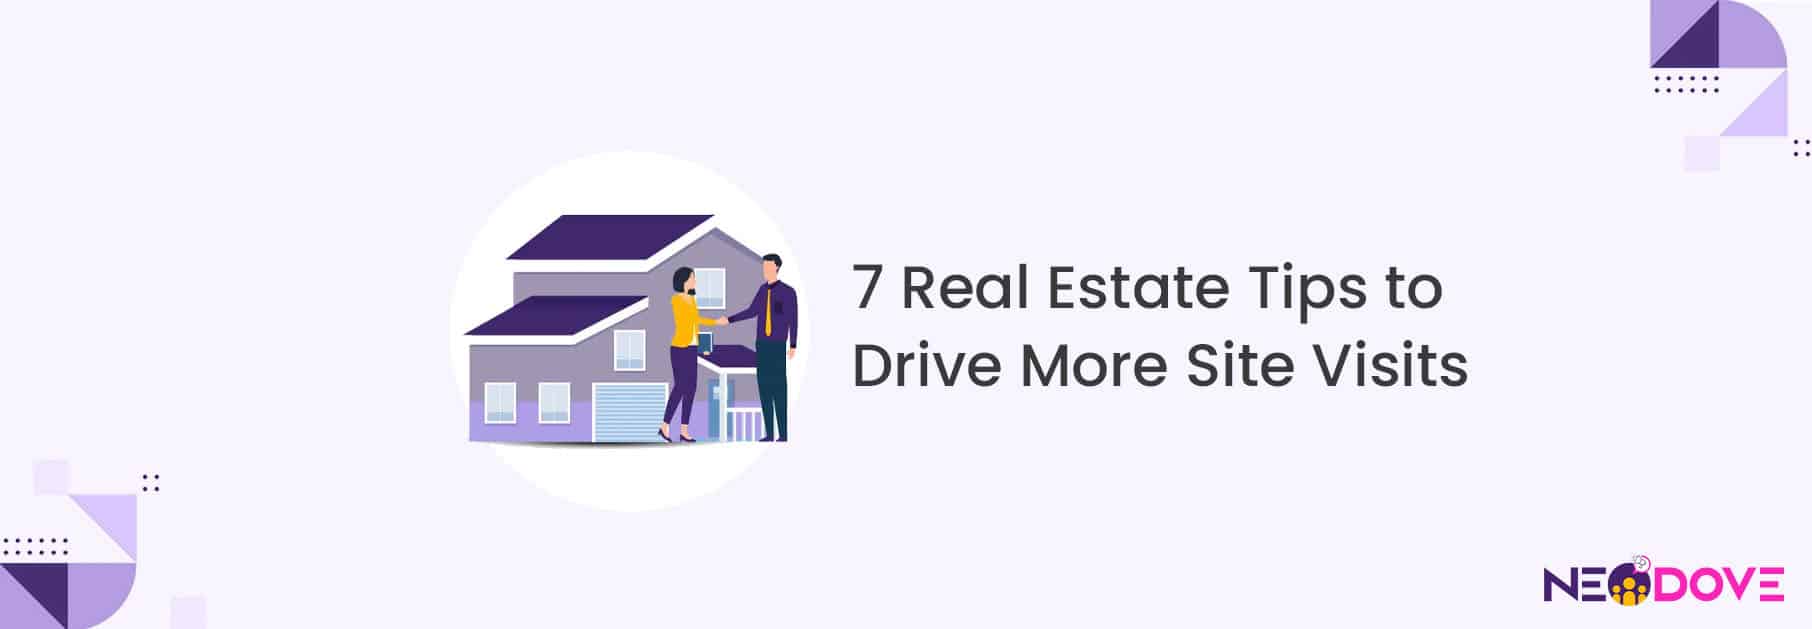 real estate tips